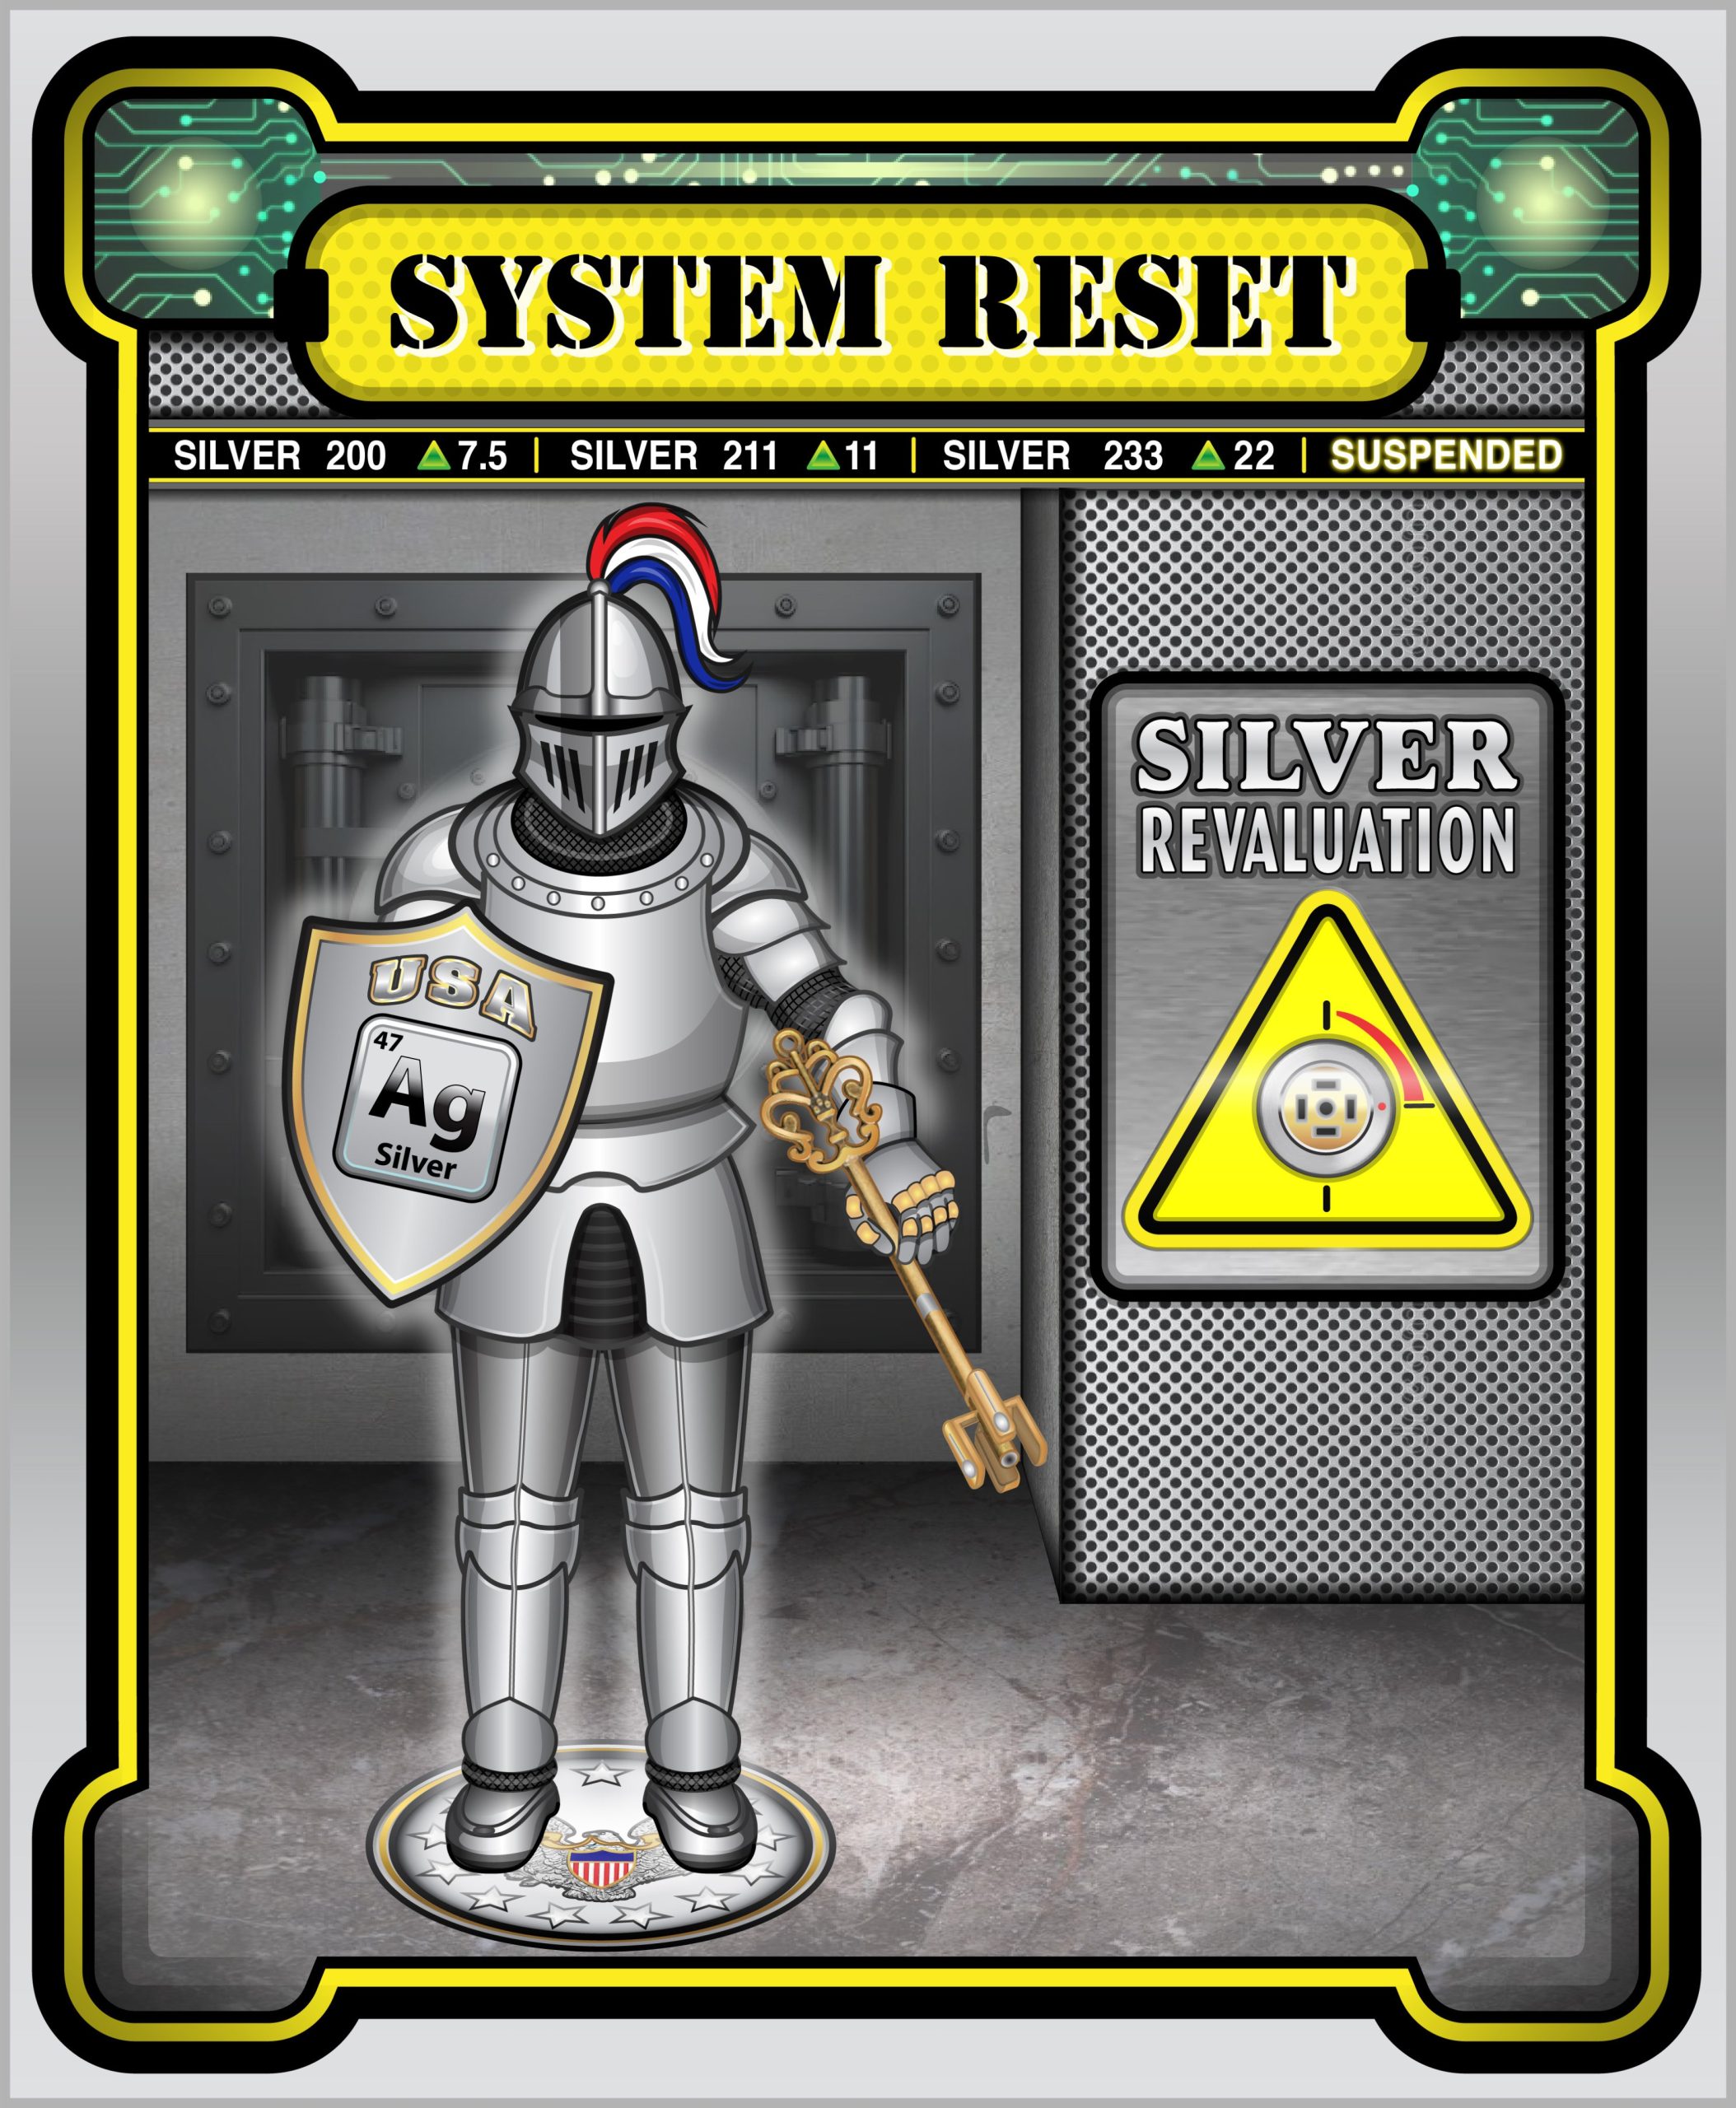 Silver Revaluation and the Financial System Reset